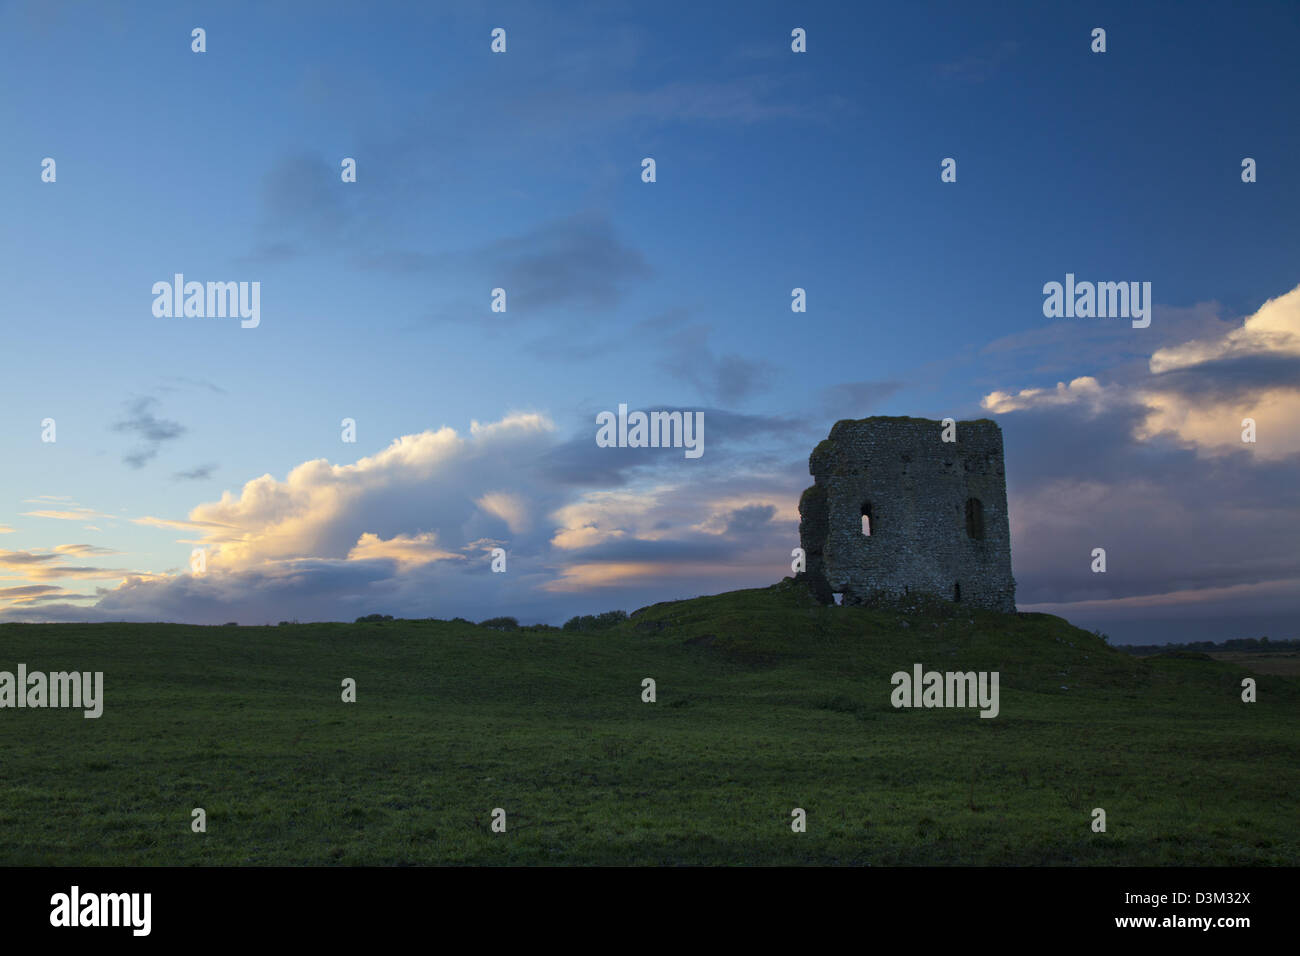 Abend im Moy Lough Castle, County Galway, Irland. Stockfoto